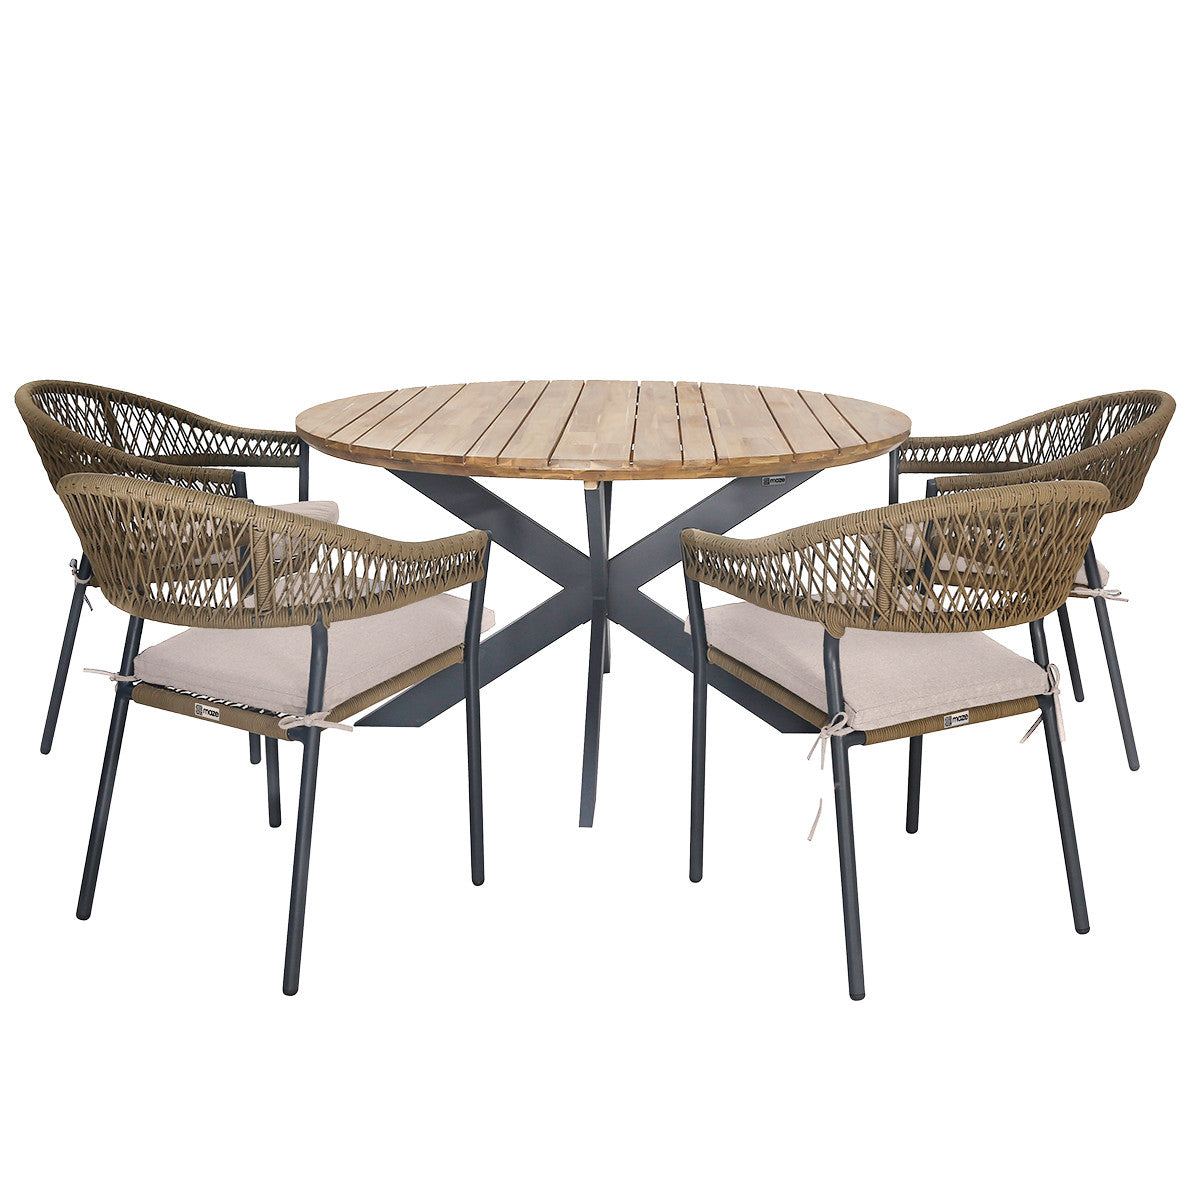 Bali Rope Weave 4 Seat Round Fixed Fabric Dining Set